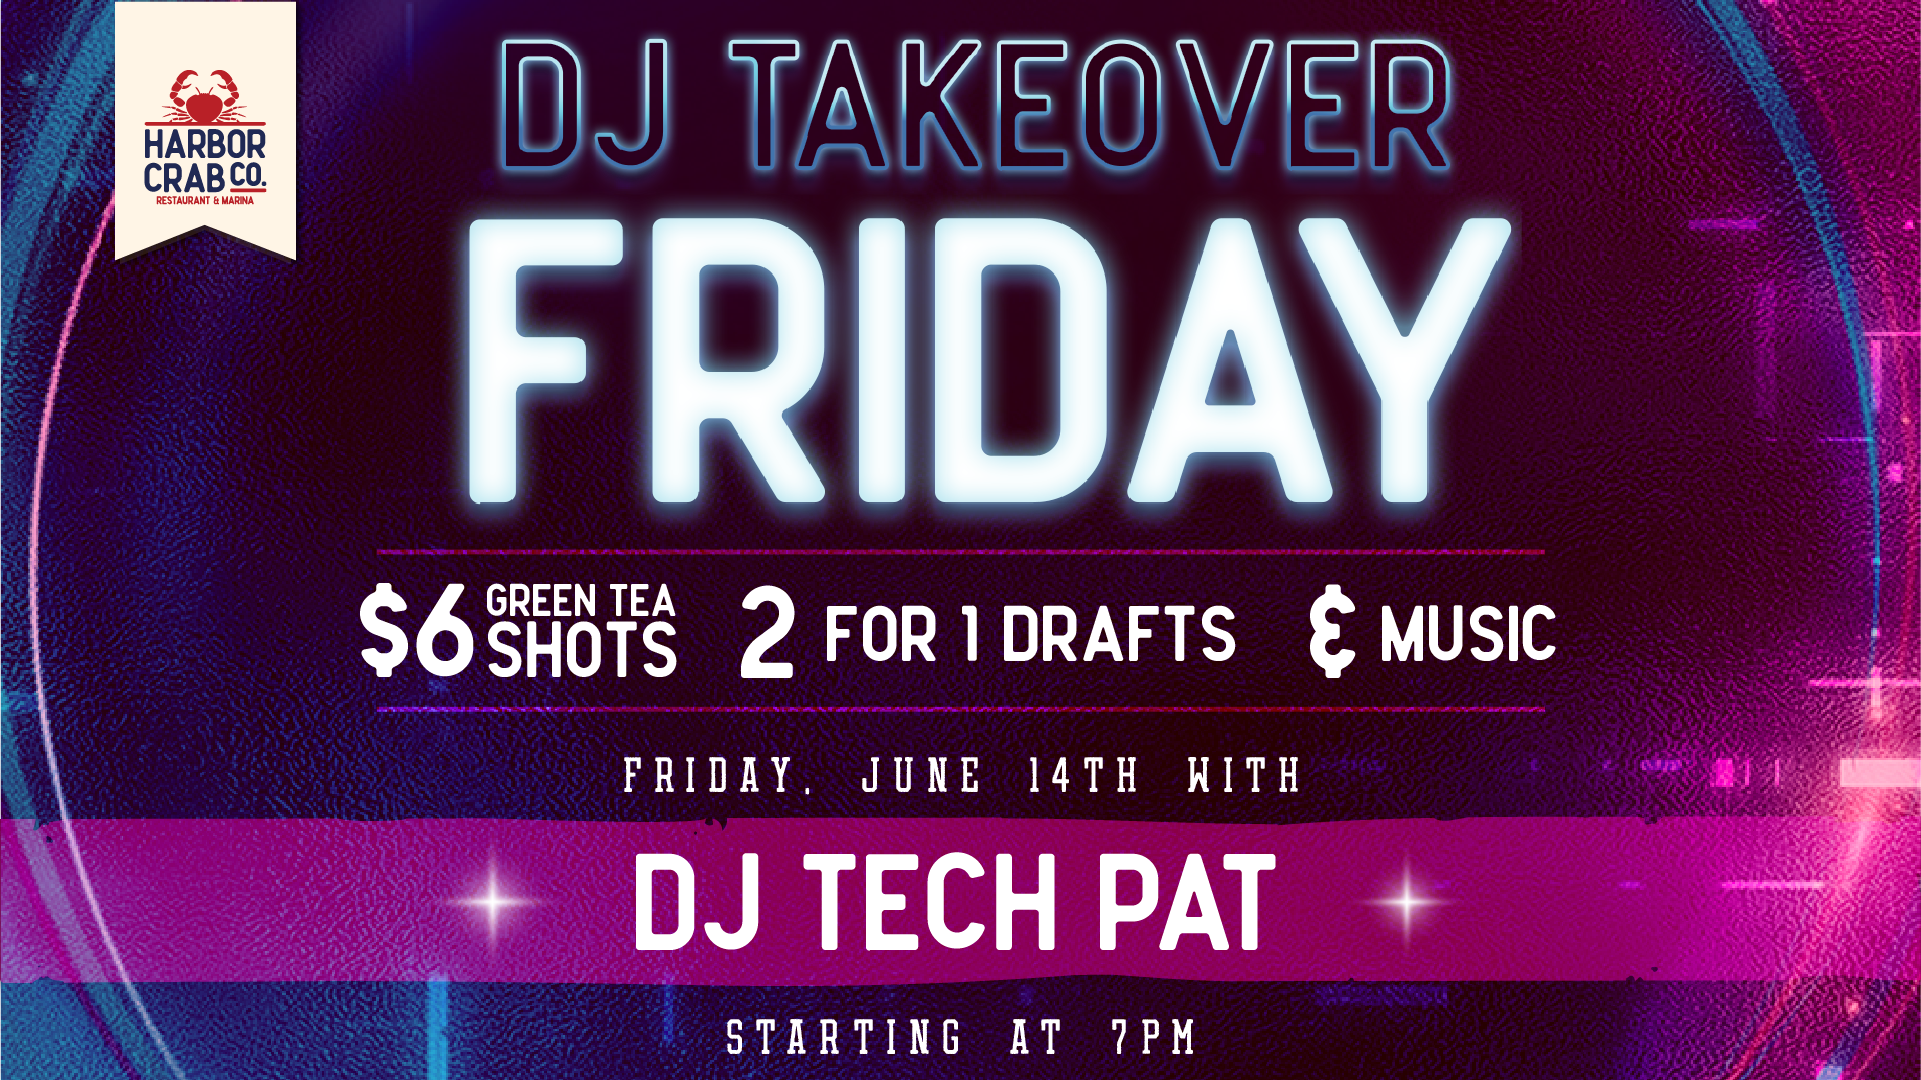 DJ Tech Pat live at Harbor Crab on June 28th at 7pm with $6 green tea shots and 2-for-1 drafts.